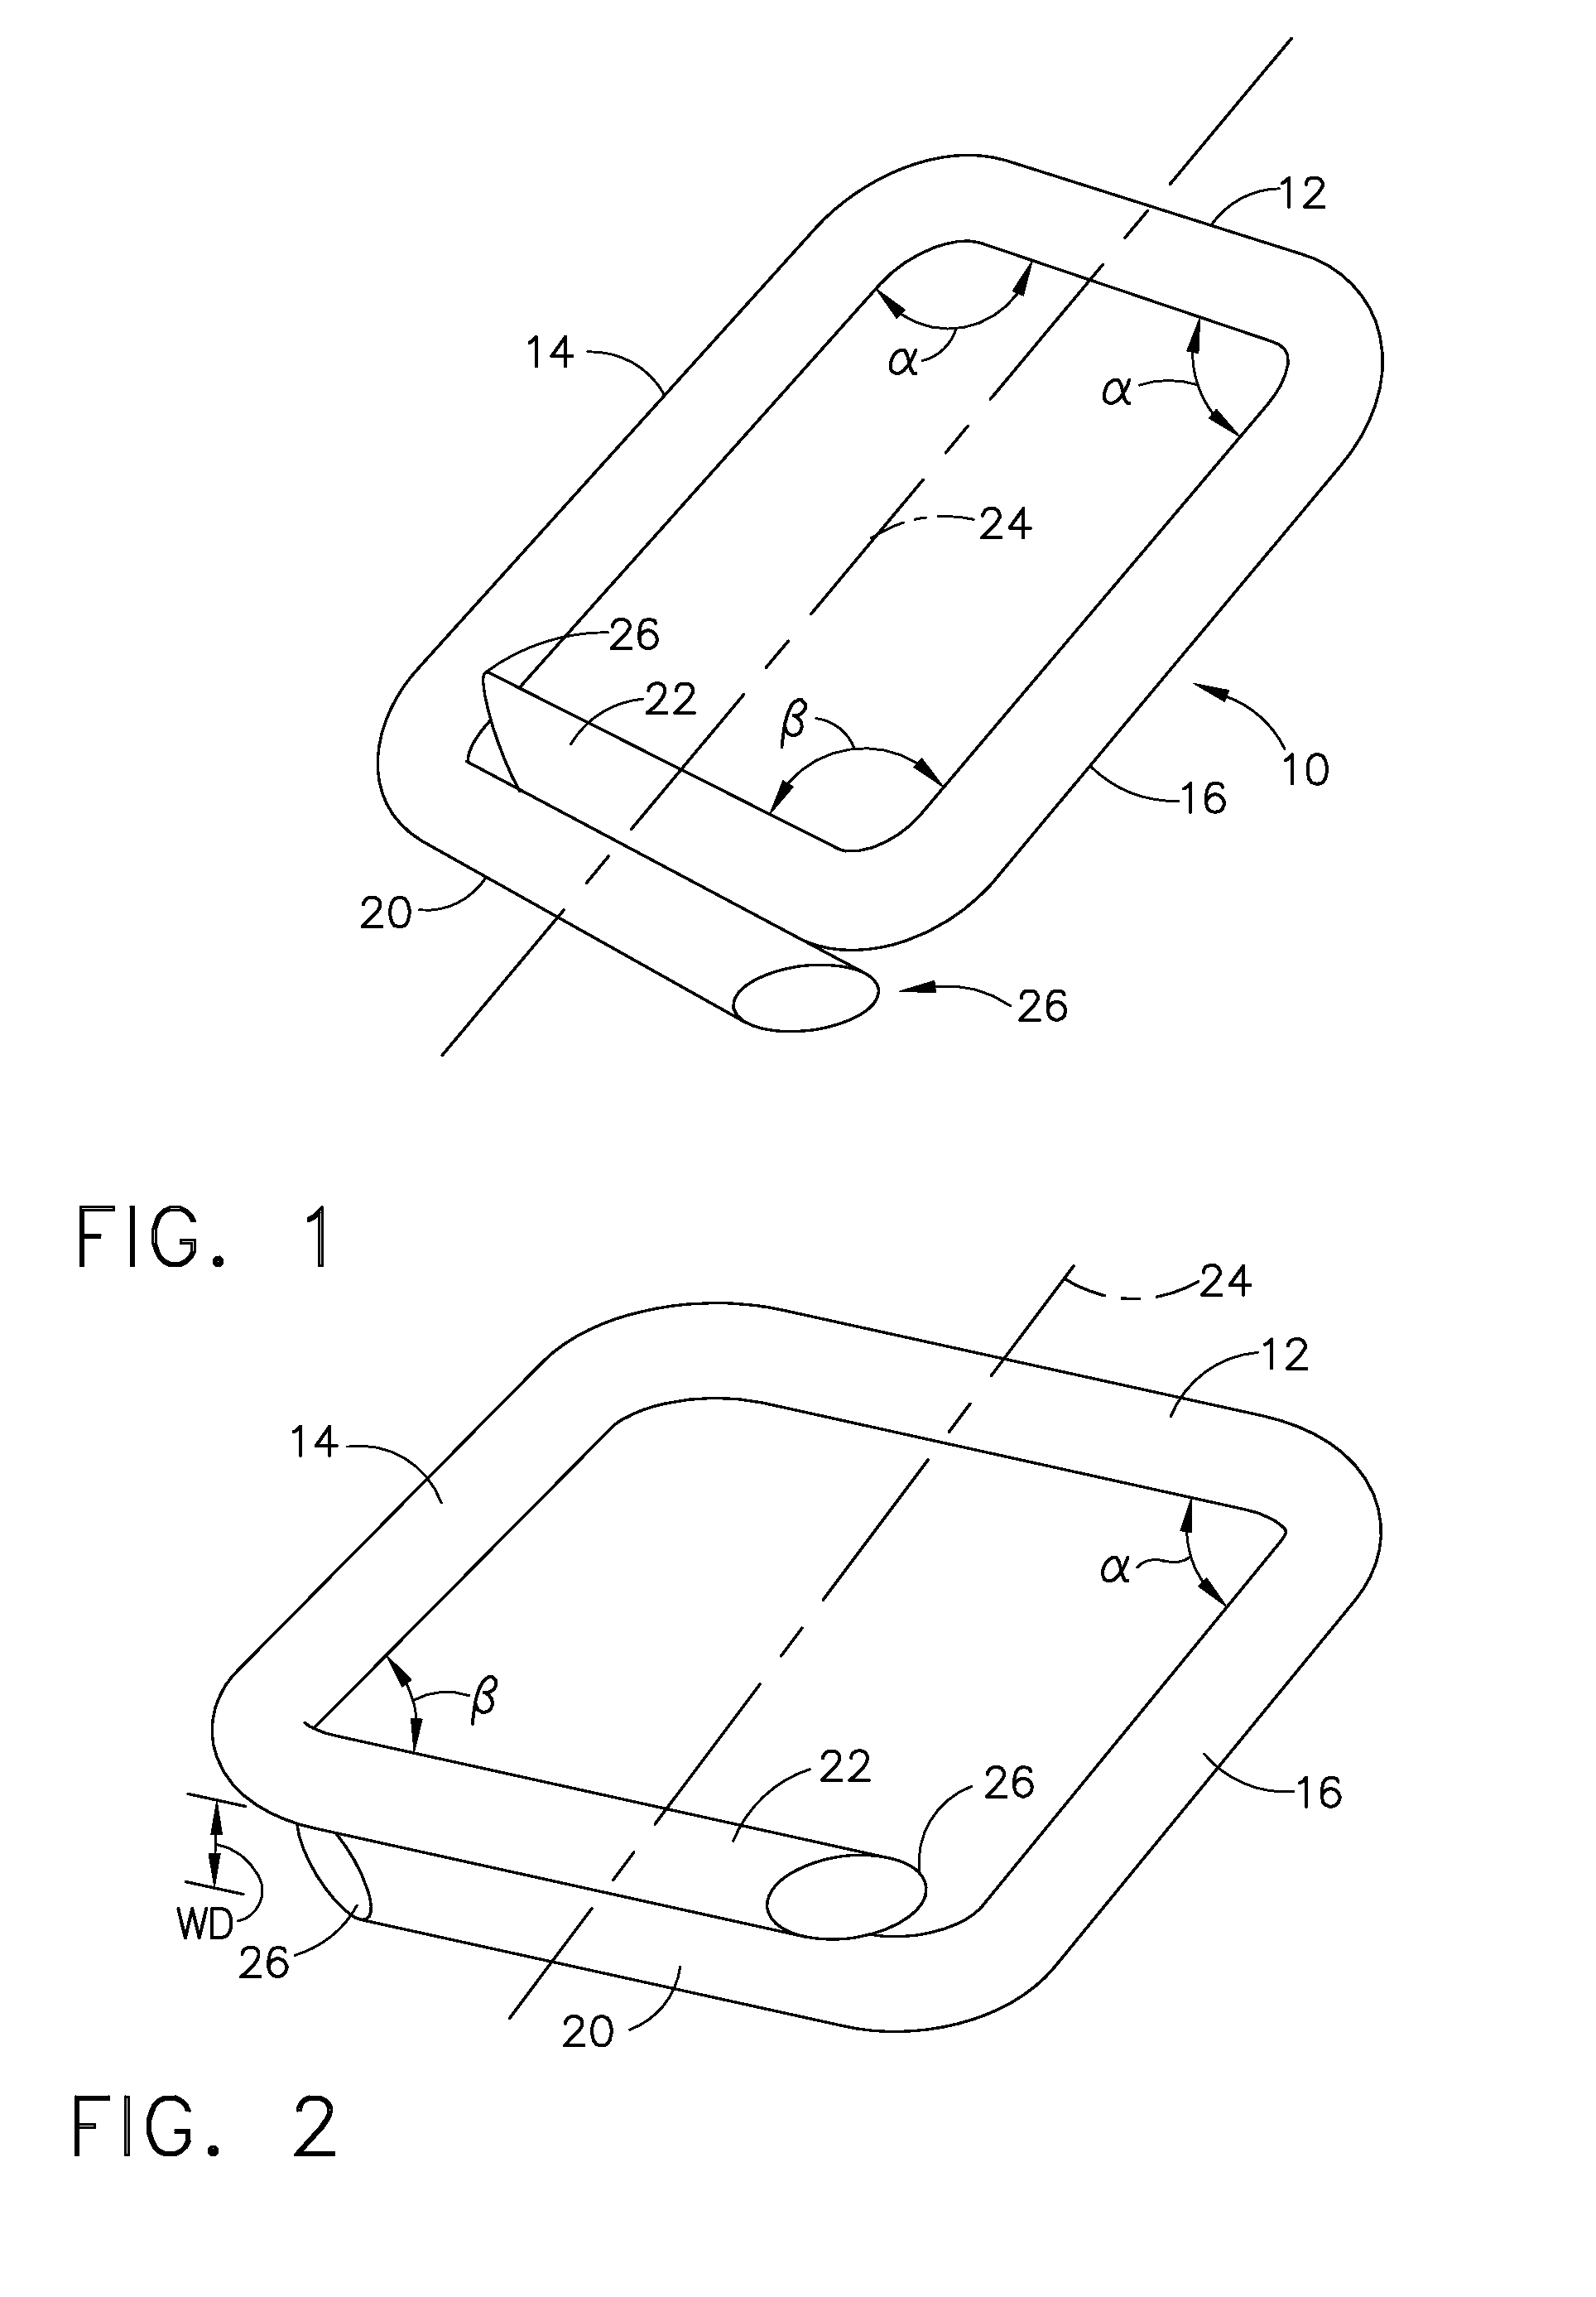 Surgical stapler for applying a large staple through small delivery port and a method of using the stapler to secure a tissue fold